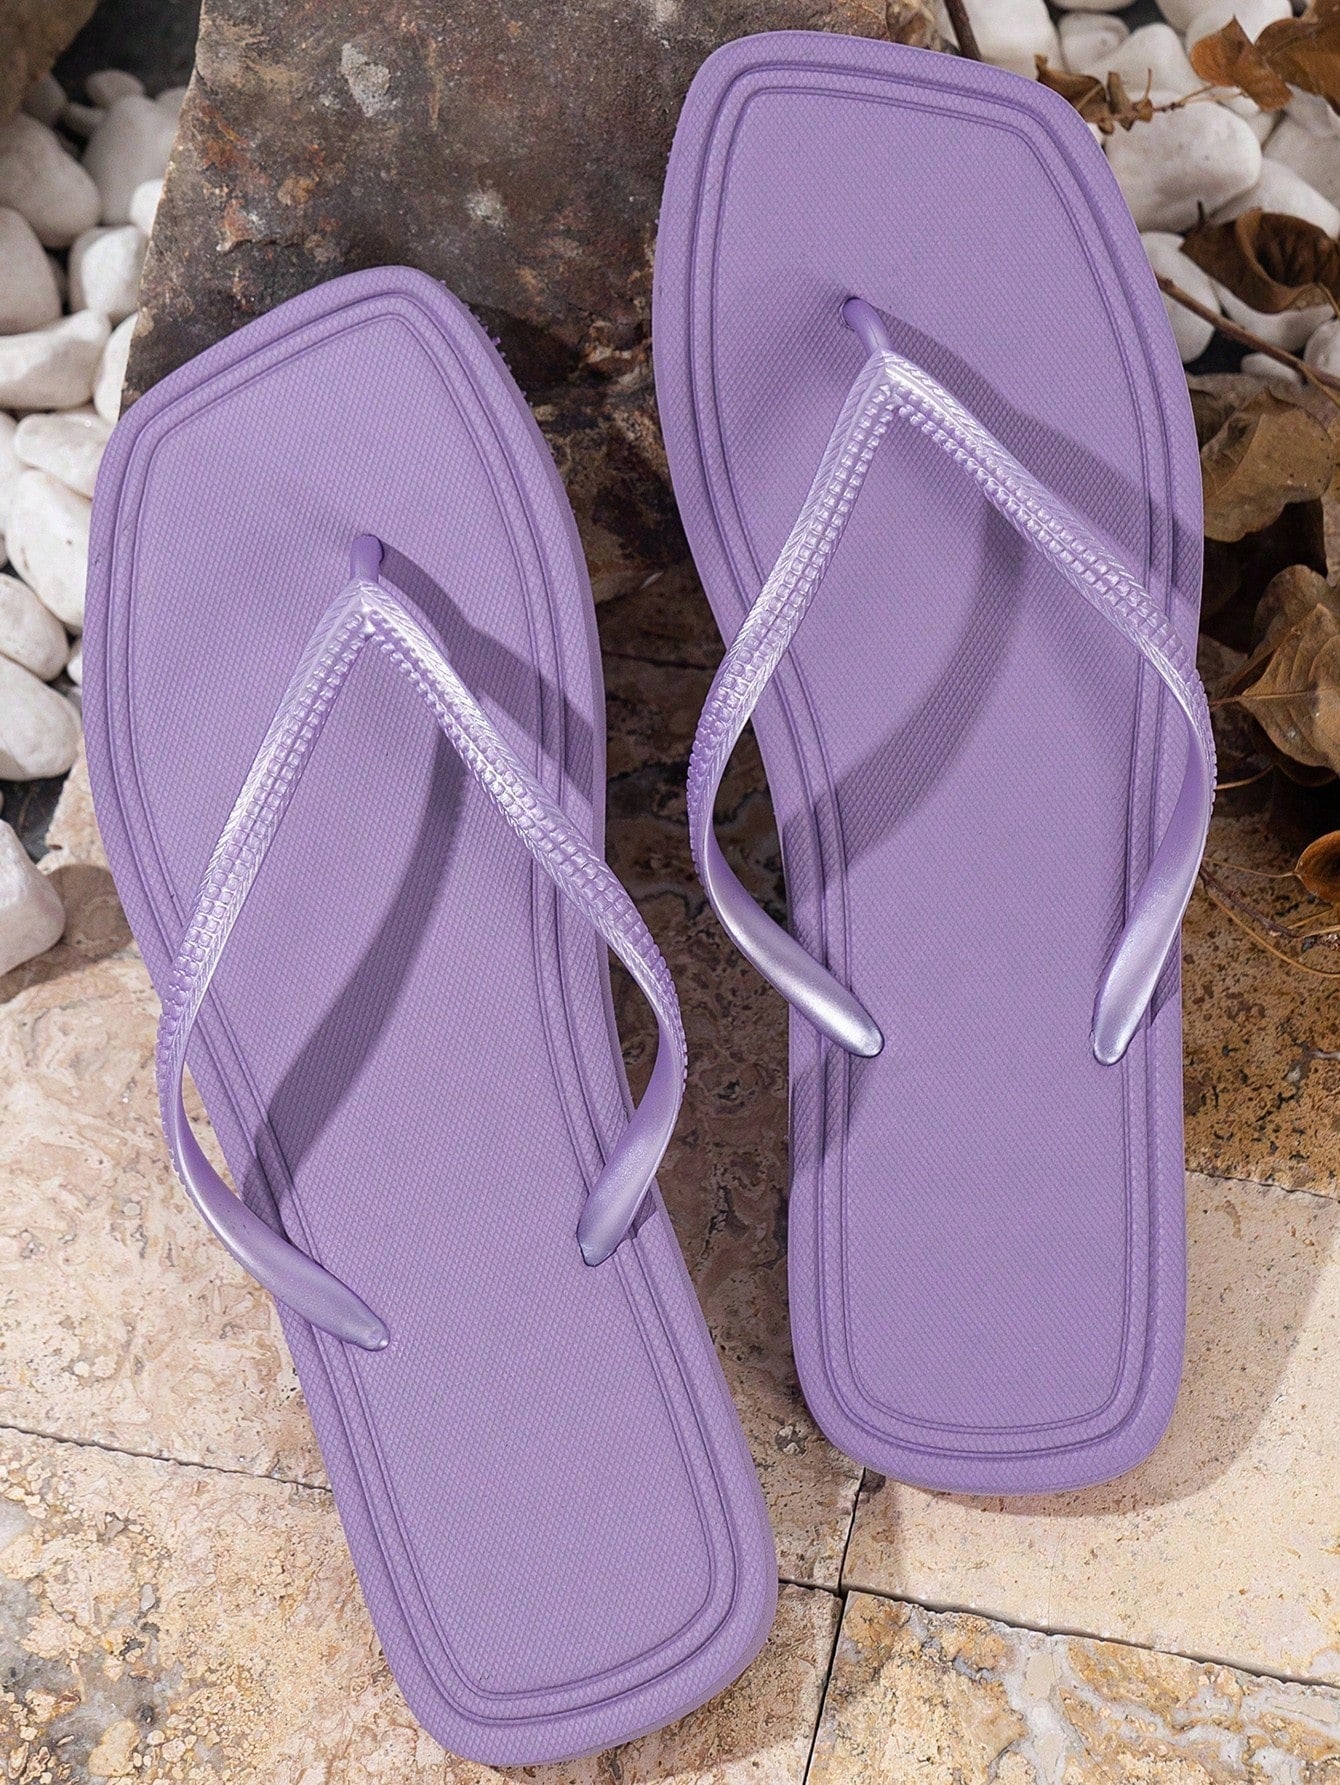 Women's Thick-Soled Flip-Flops With Rhinestone Strap, Lightweight & Comfortable, Non-Slip, Perfect For Beach, Swimming And Holidays, Waterproof Eva Material.-Purple-2